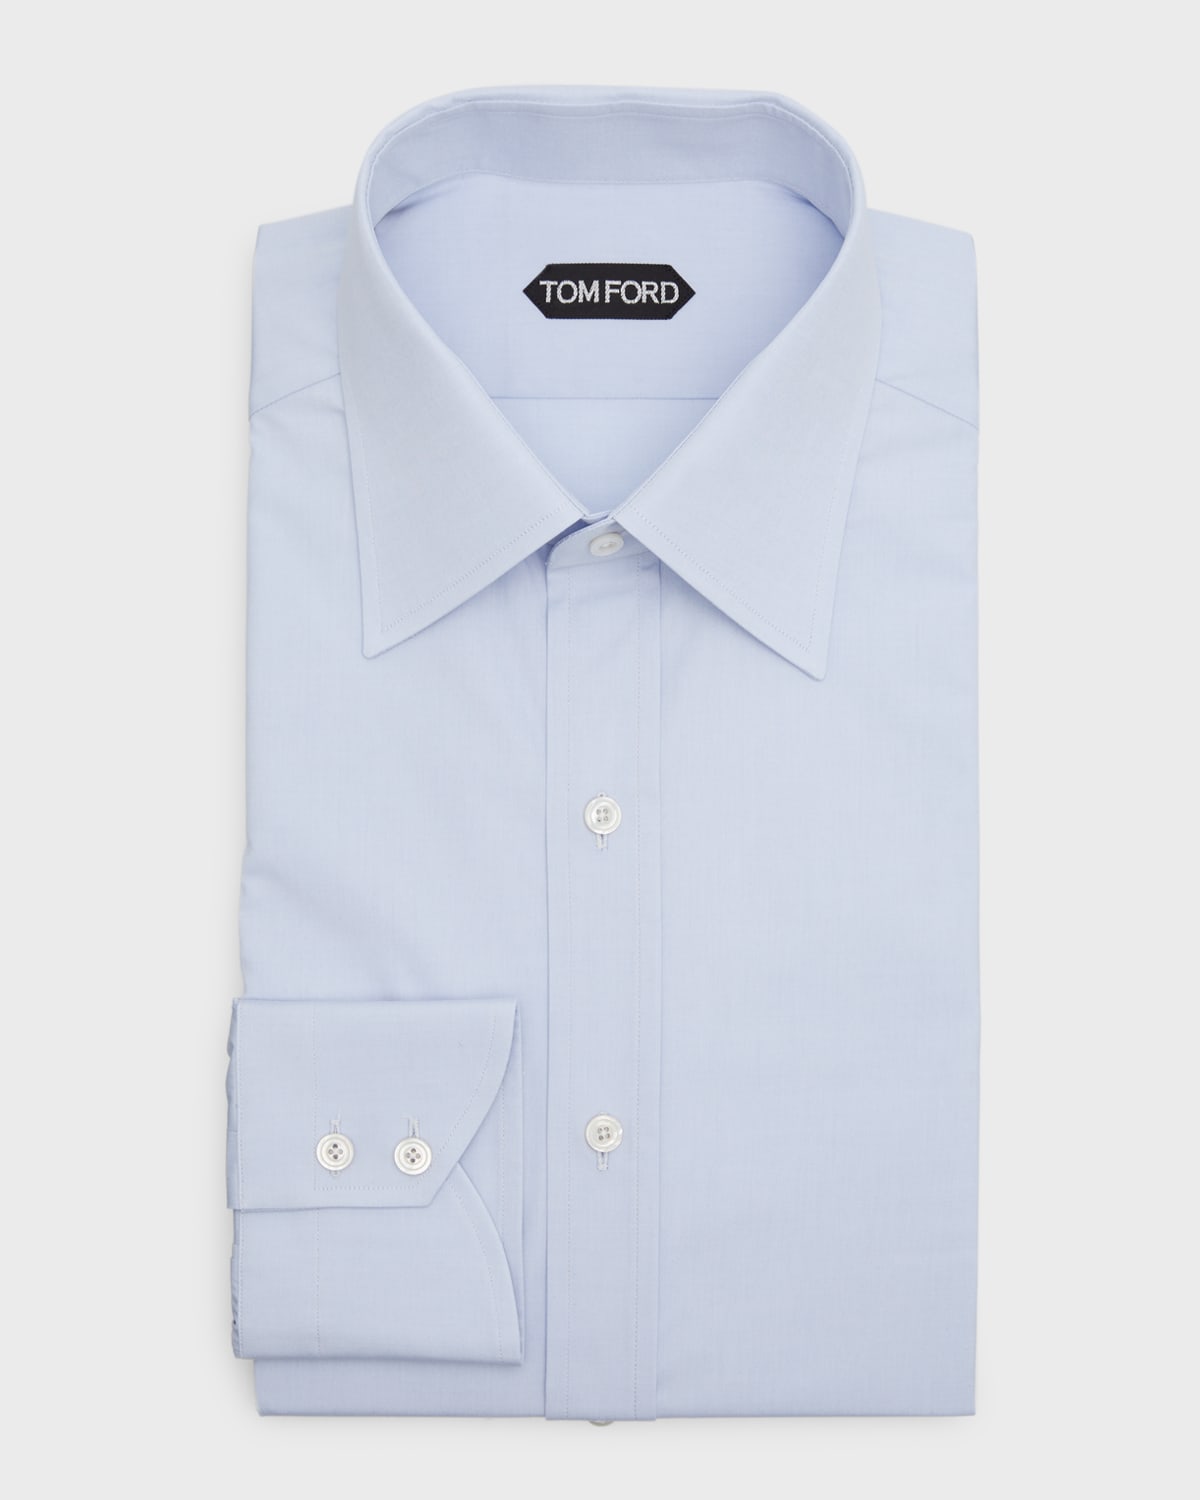 TOM FORD Men's Solid Point Collar Dress Shirt | Neiman Marcus